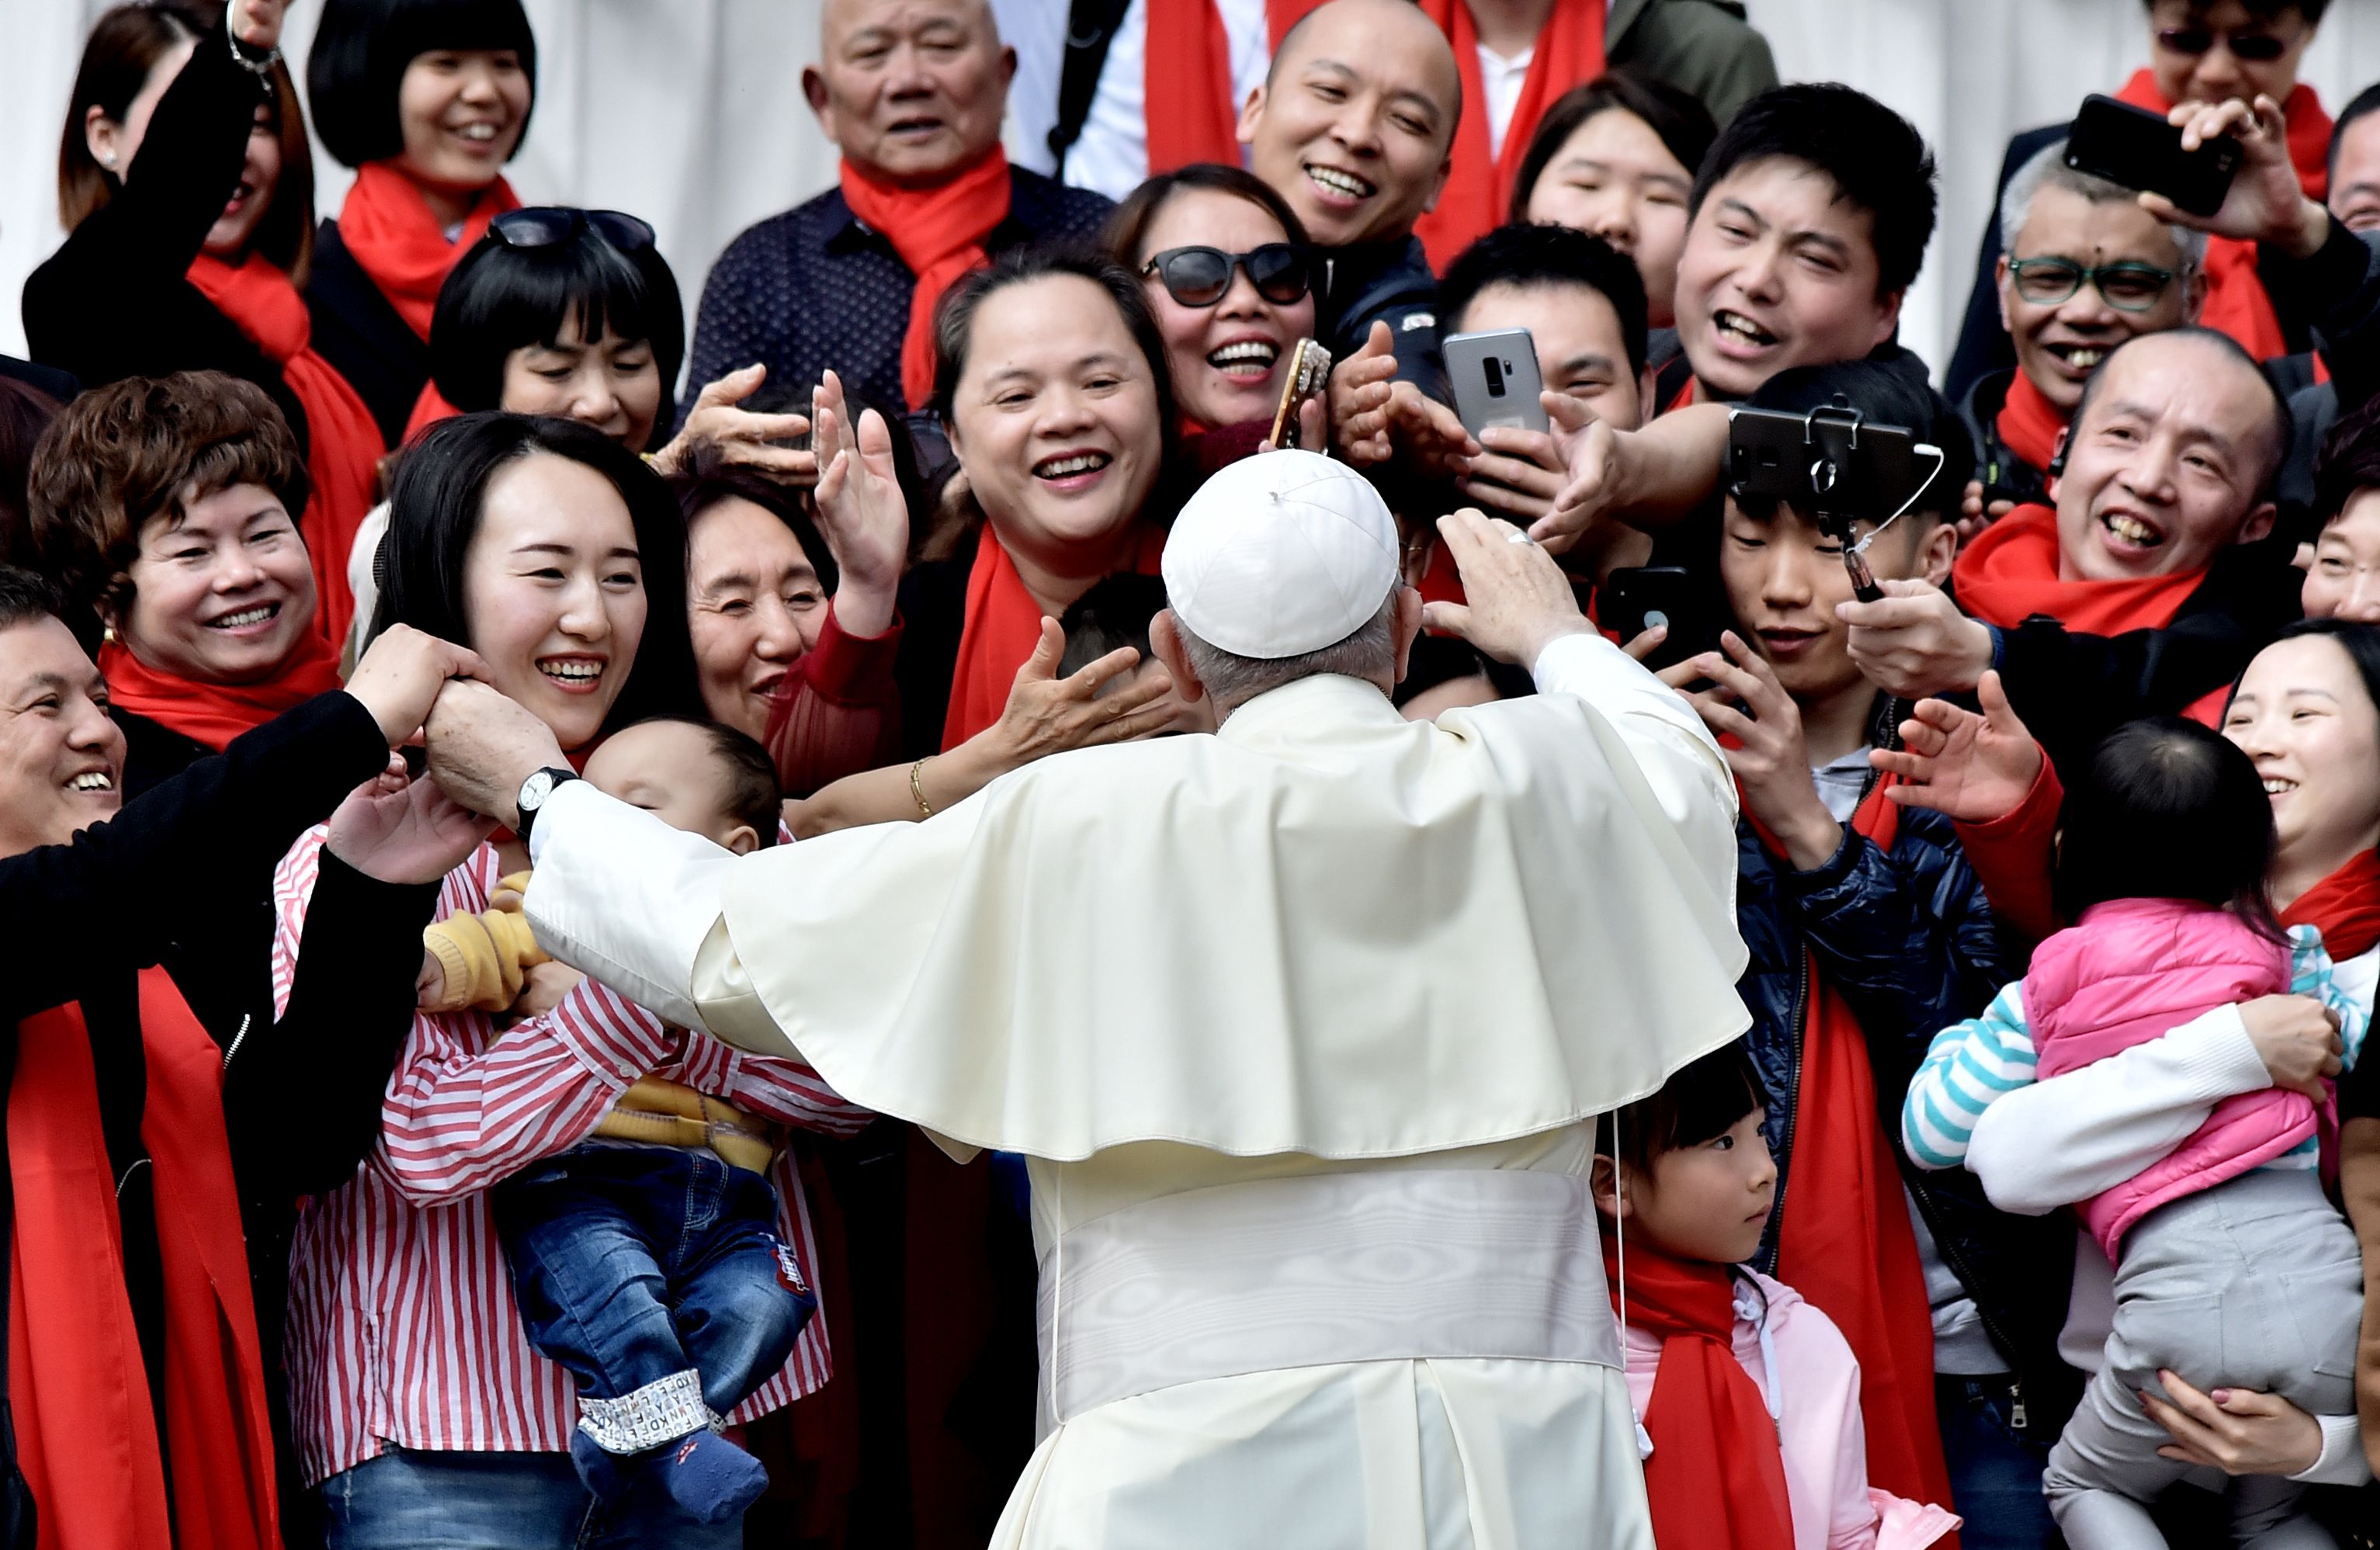 TOPSHOT - Pope Francis greets faithful from China as he arrives for his weekly general audience on April 18, 2018, on St. Peter's square in the Vatican. (Photo by TIZIANA FABI / AFP) (Photo credit should read TIZIANA FABI/AFP via Getty Images)